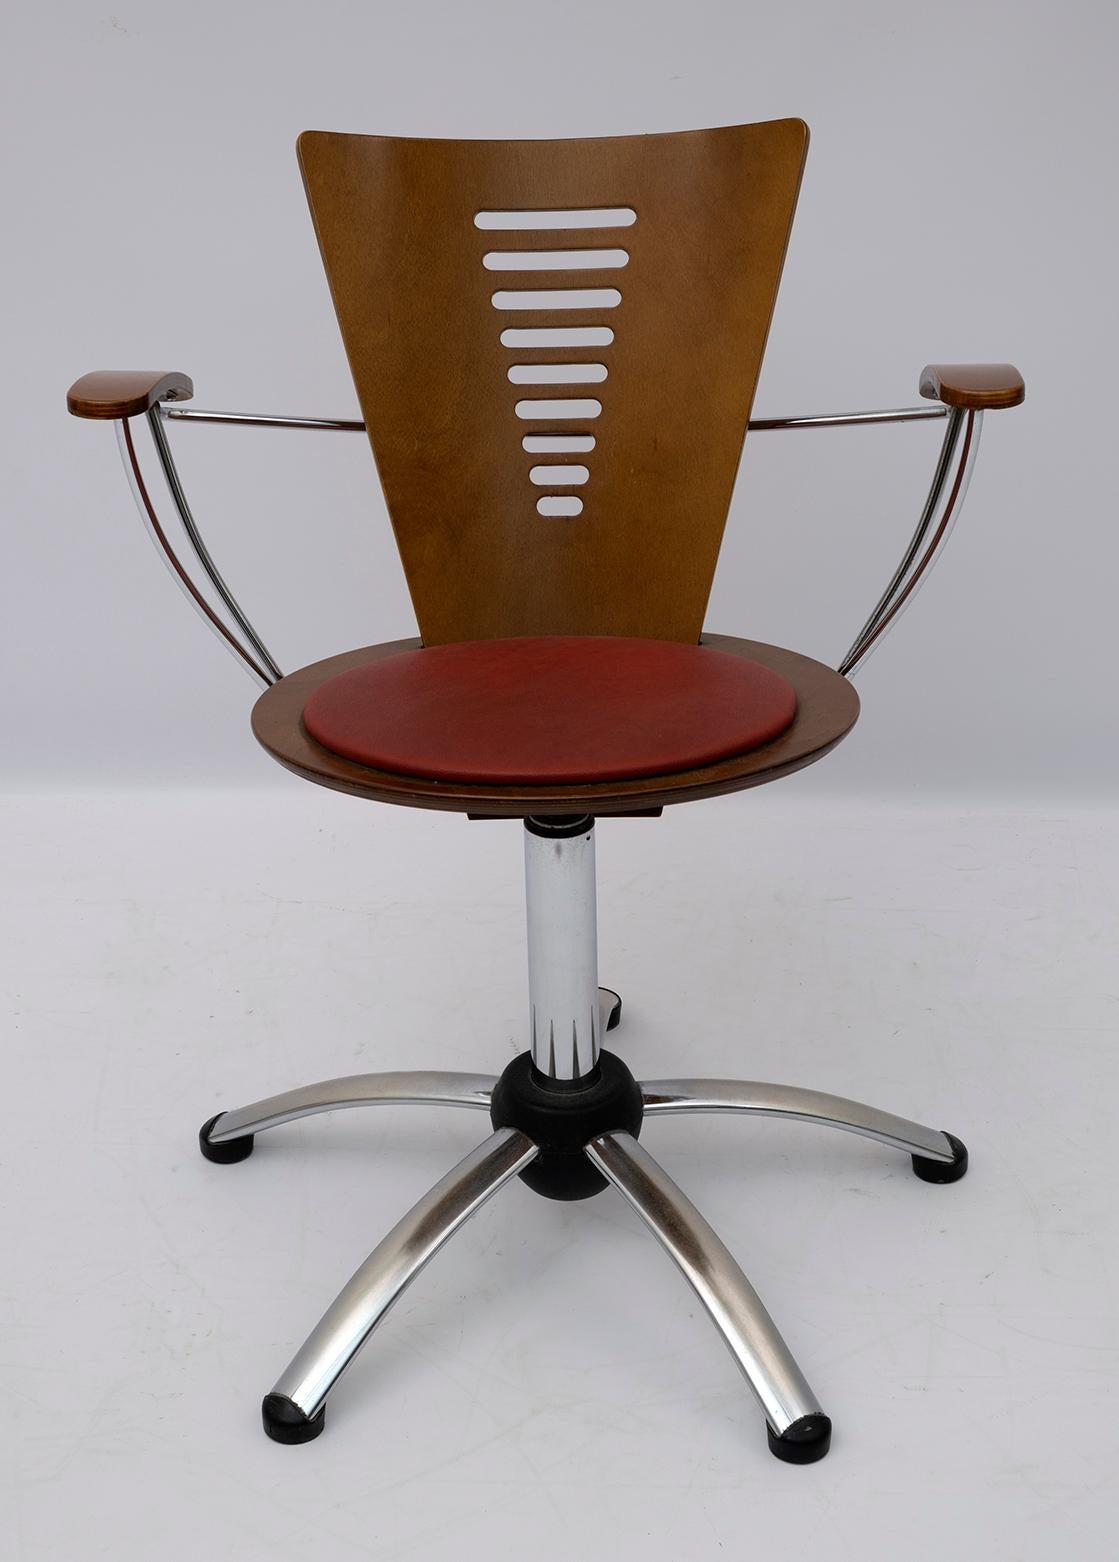 Four Postmodern Italian Swivel Chairs Curved Wood and Chromed Metal, 1980s For Sale 3